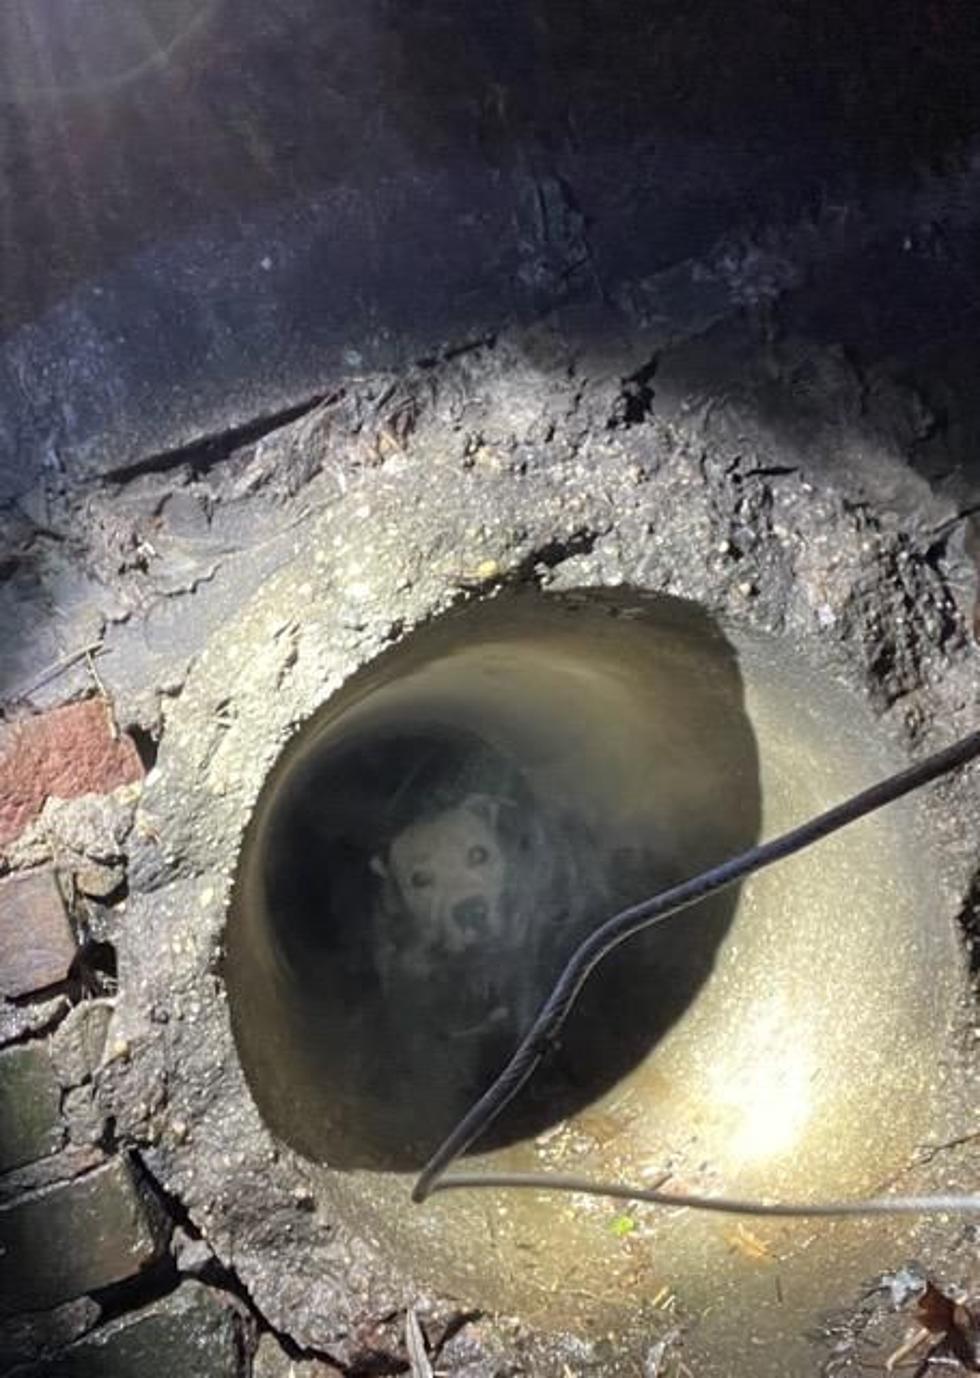 Police in Lower Hudson Valley Rescue Dog Trapped in Sewer [PICS]